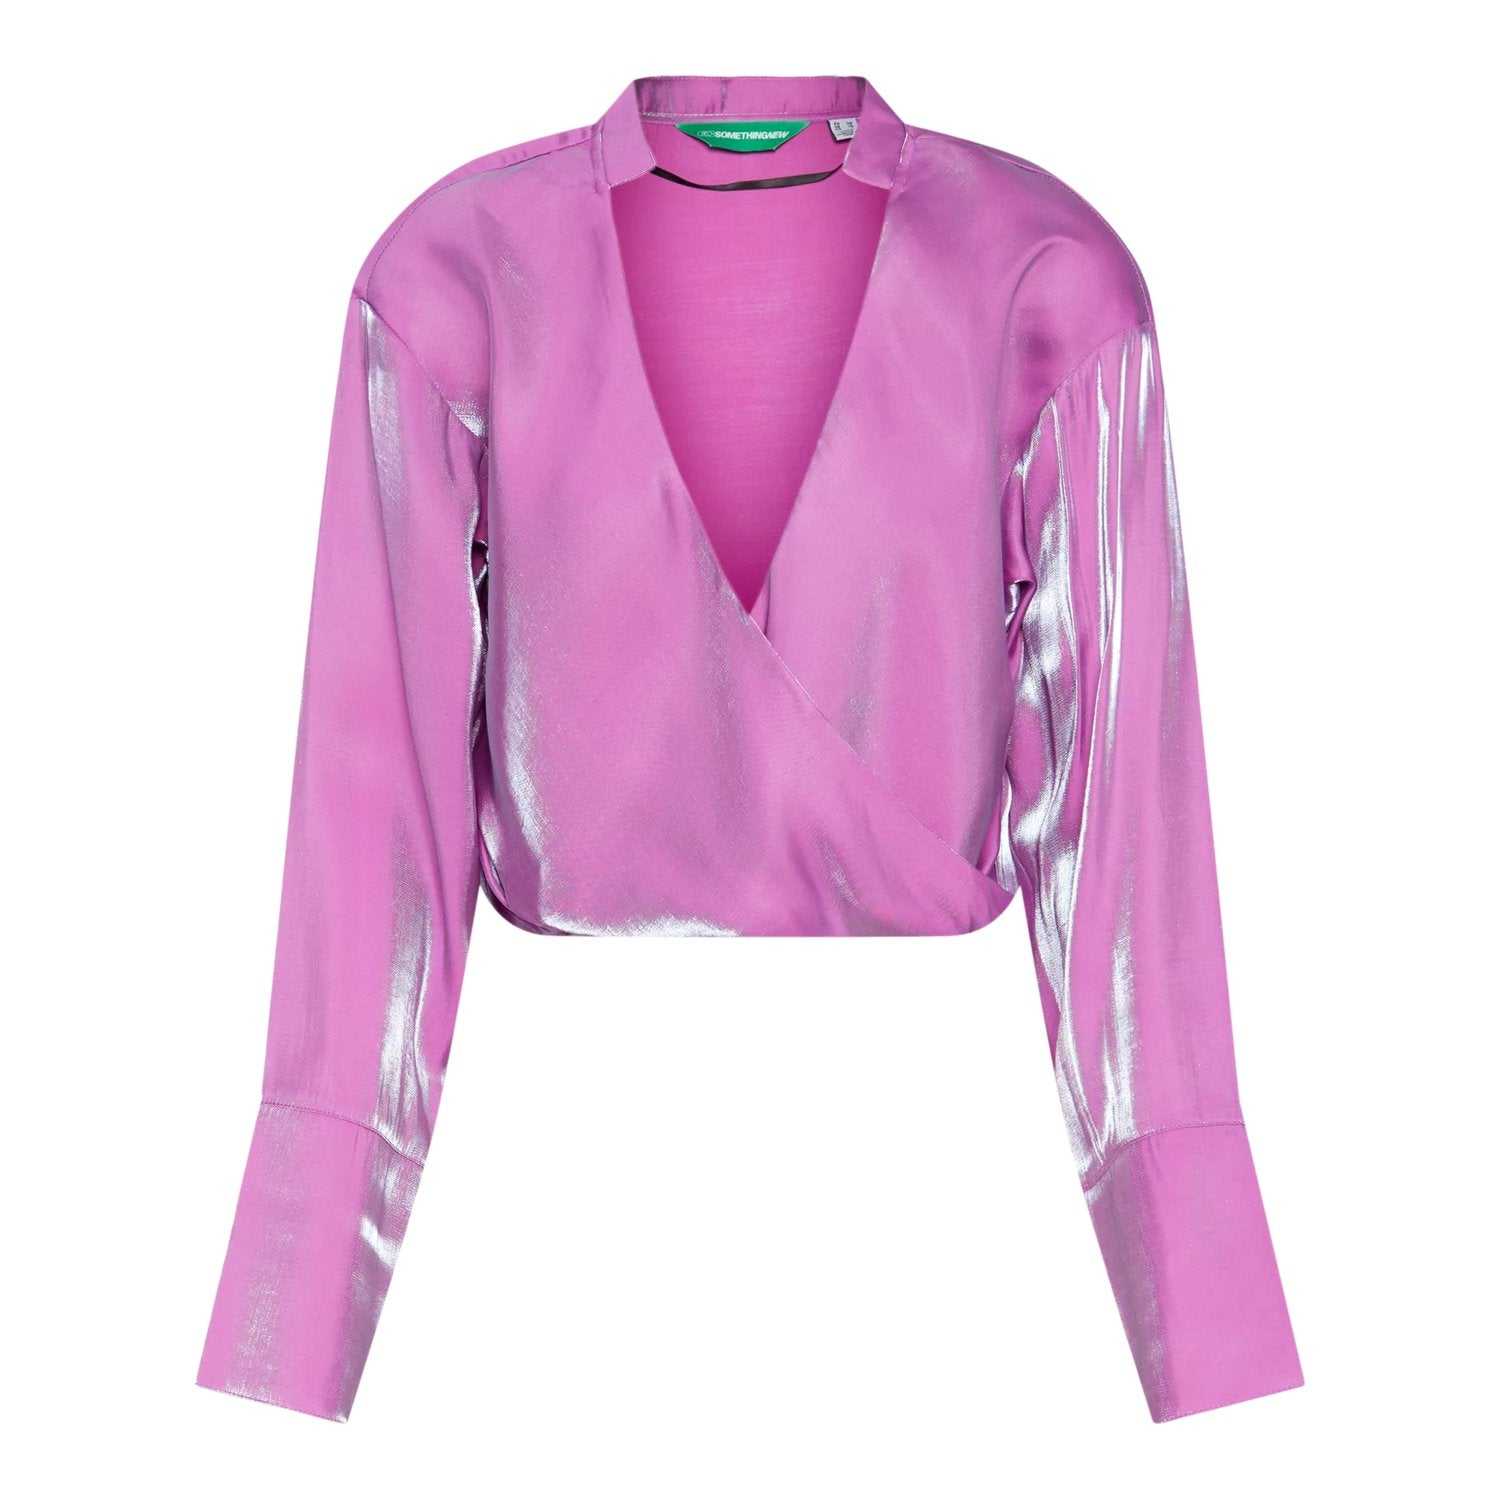 Snbey Crystal Satin Cropped Blouse